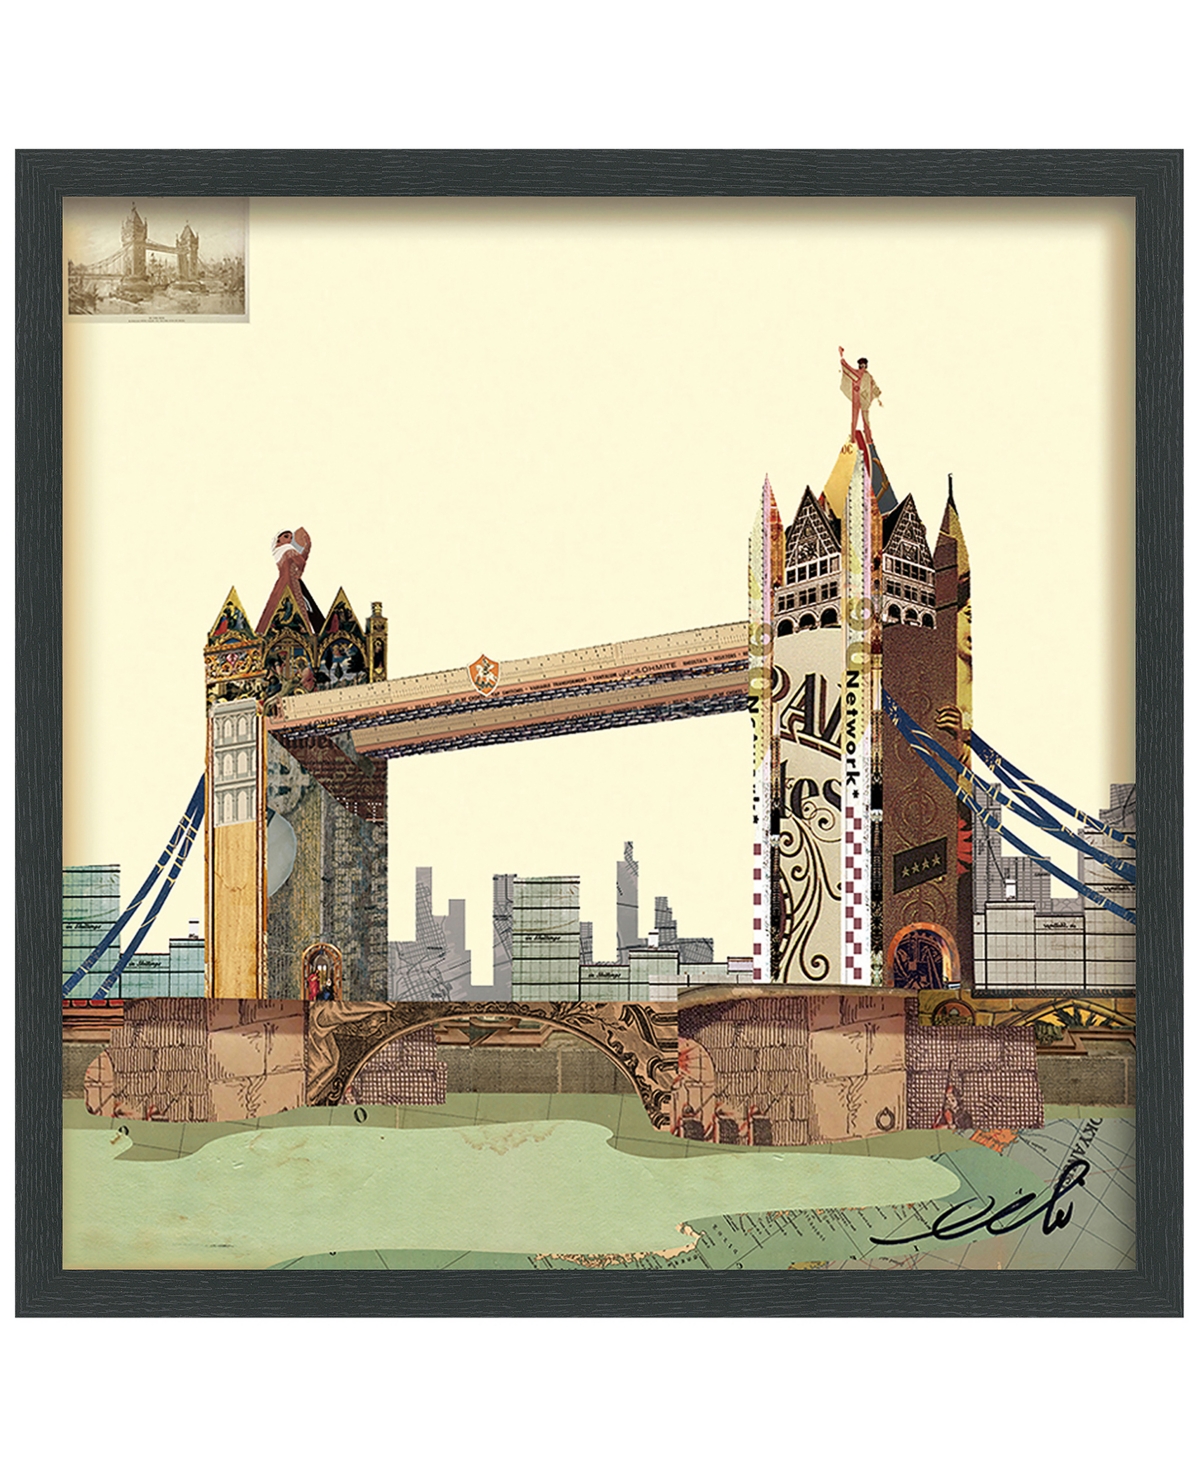 Empire Art Direct "london Bridge" Hand-made Dimensional Art Collage, Under Glass, Encased On A Black Shadow Box Frame, In Multi-color